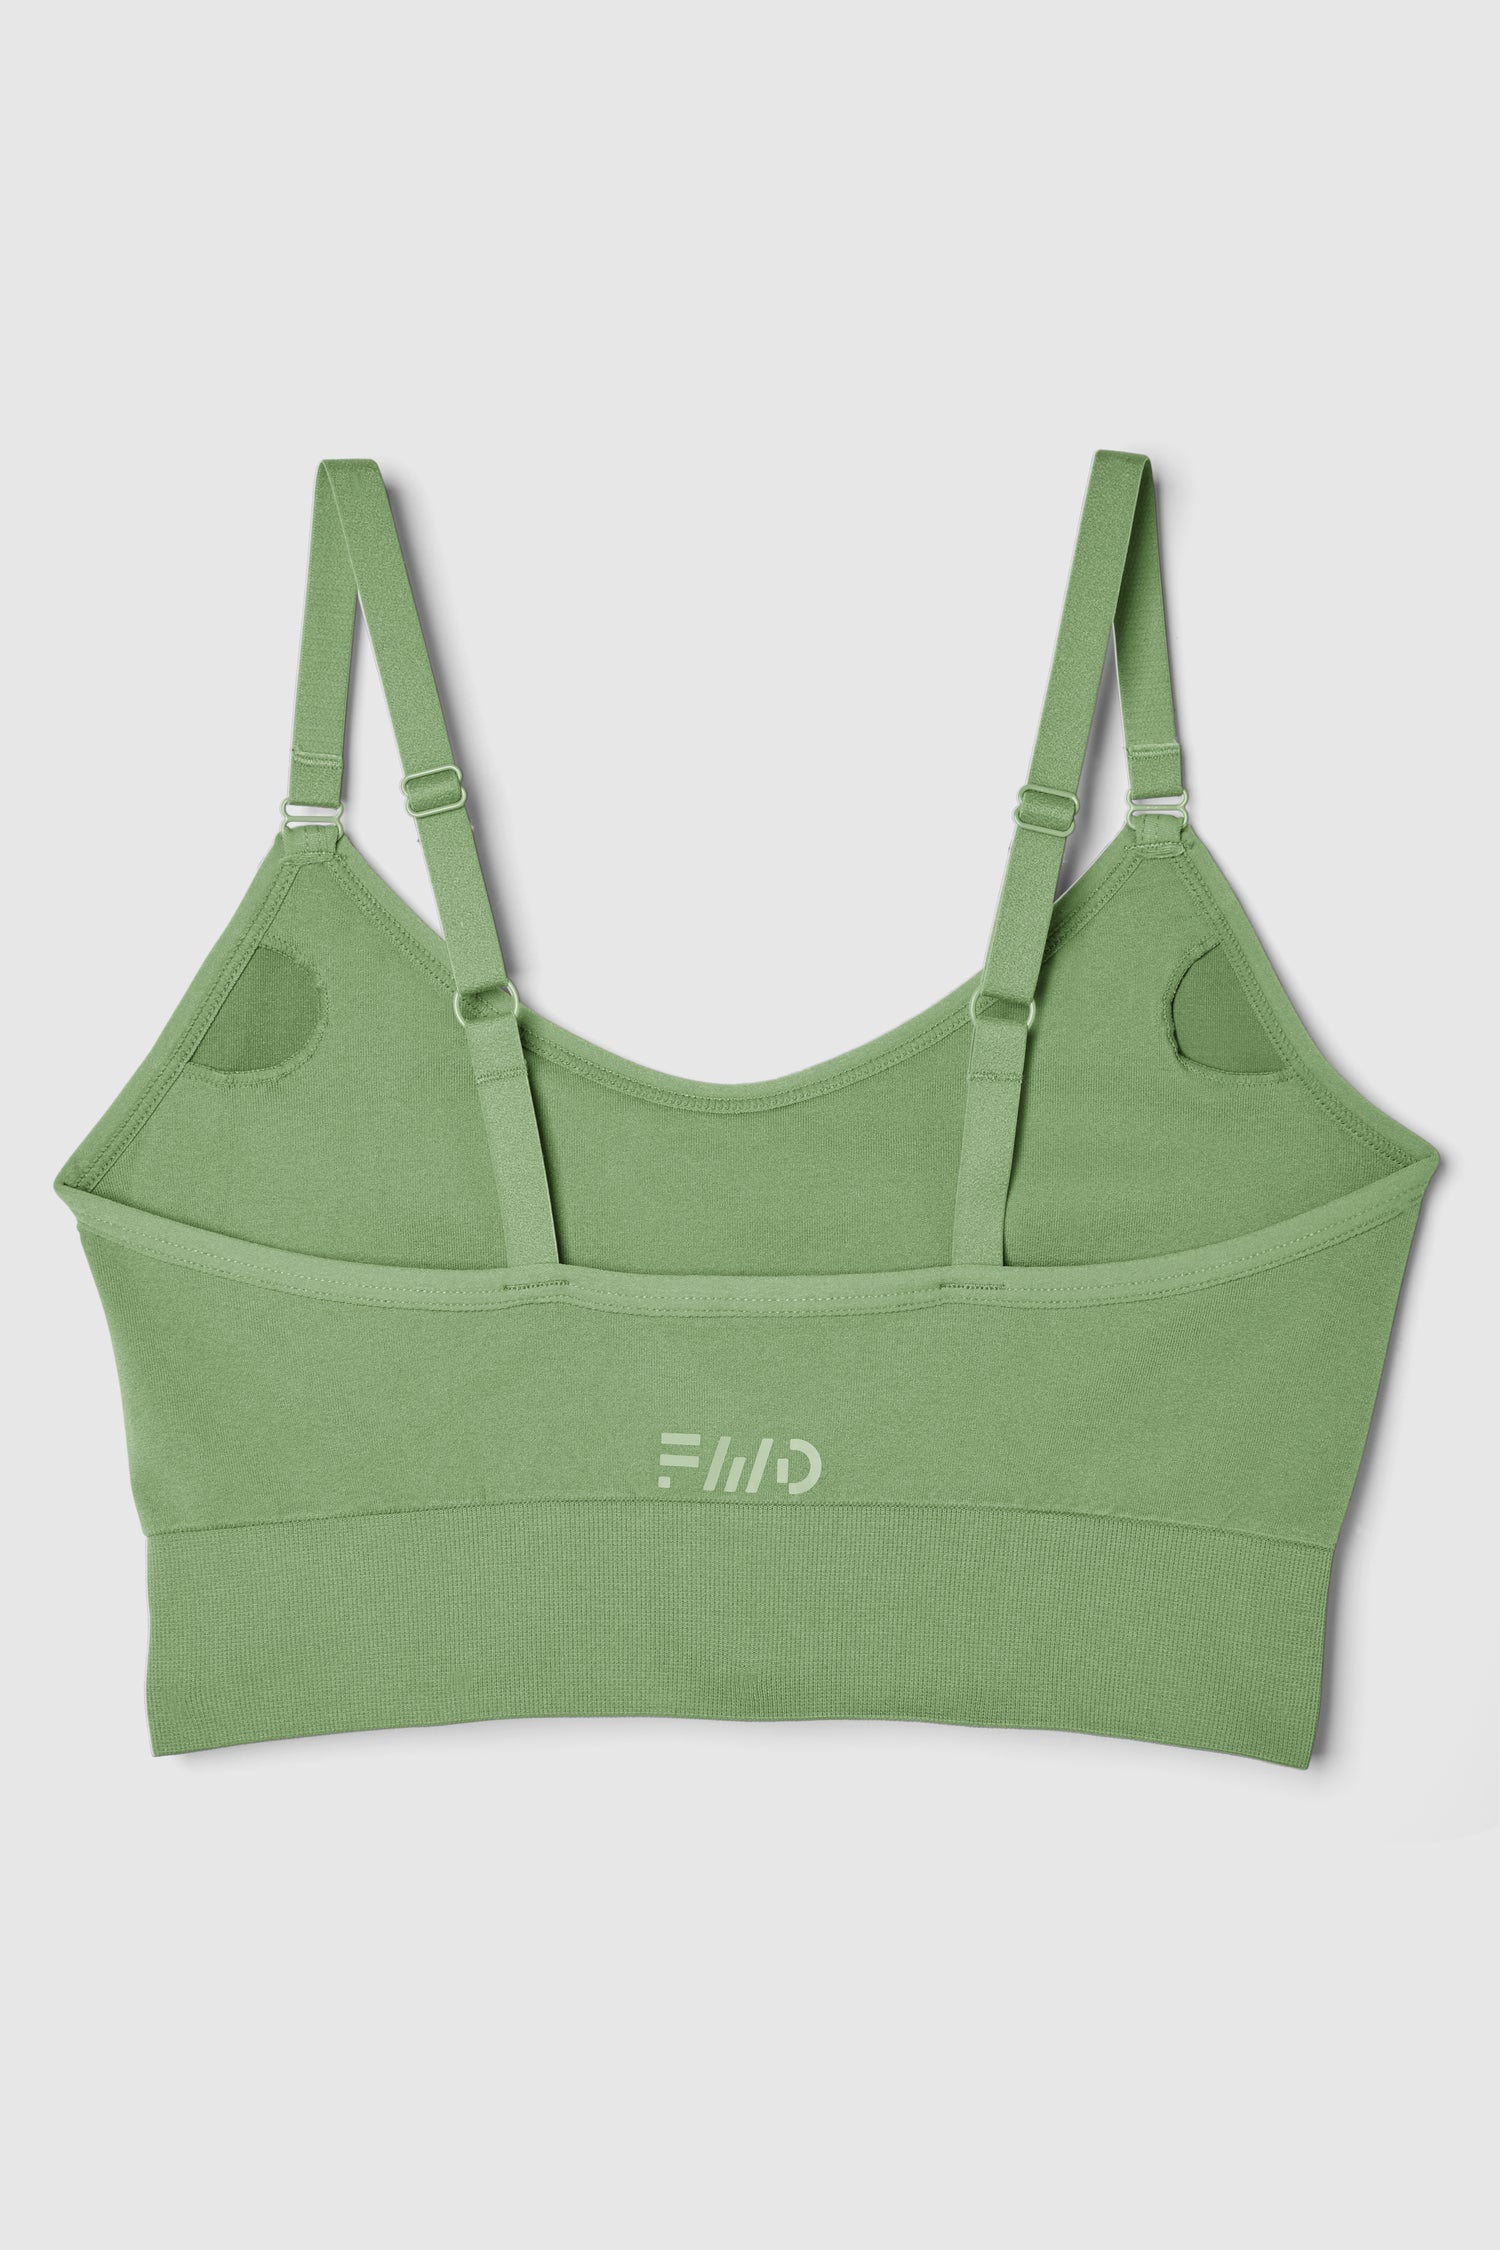 FWD Women's Seamless Sports Bra, Low Impact, Removable Pads